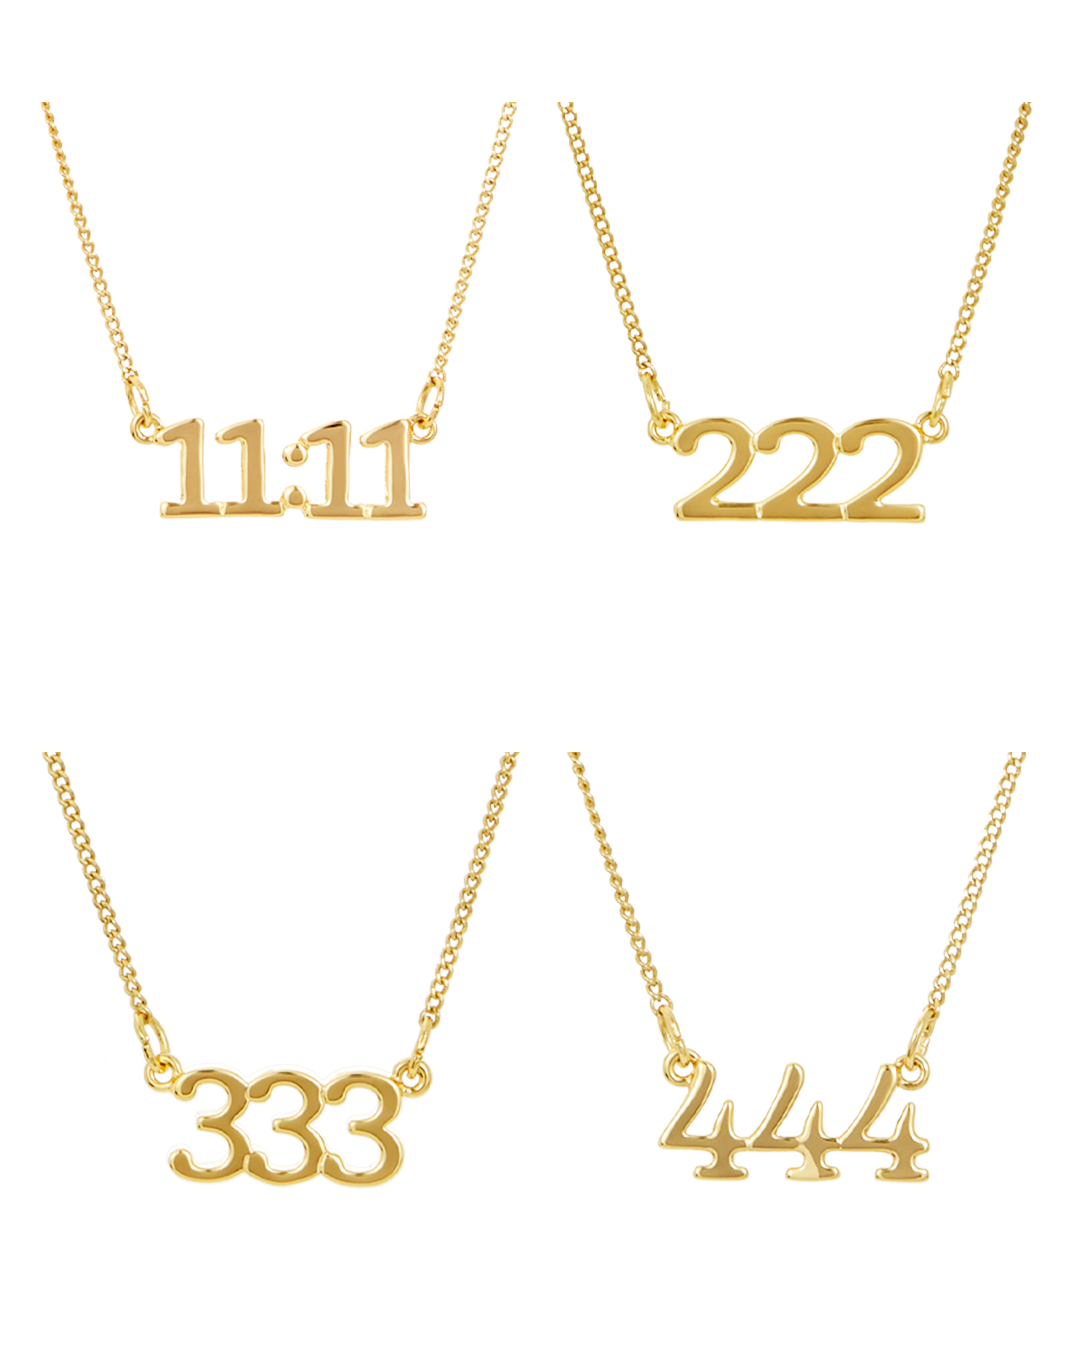 Gold Chain 444 Necklace Angel Number 222 333 Collar Punk Jewelry Stainless  Steel Deil Pendant Necklace Babygirl Birthday Gift - Necklace - AliExpress